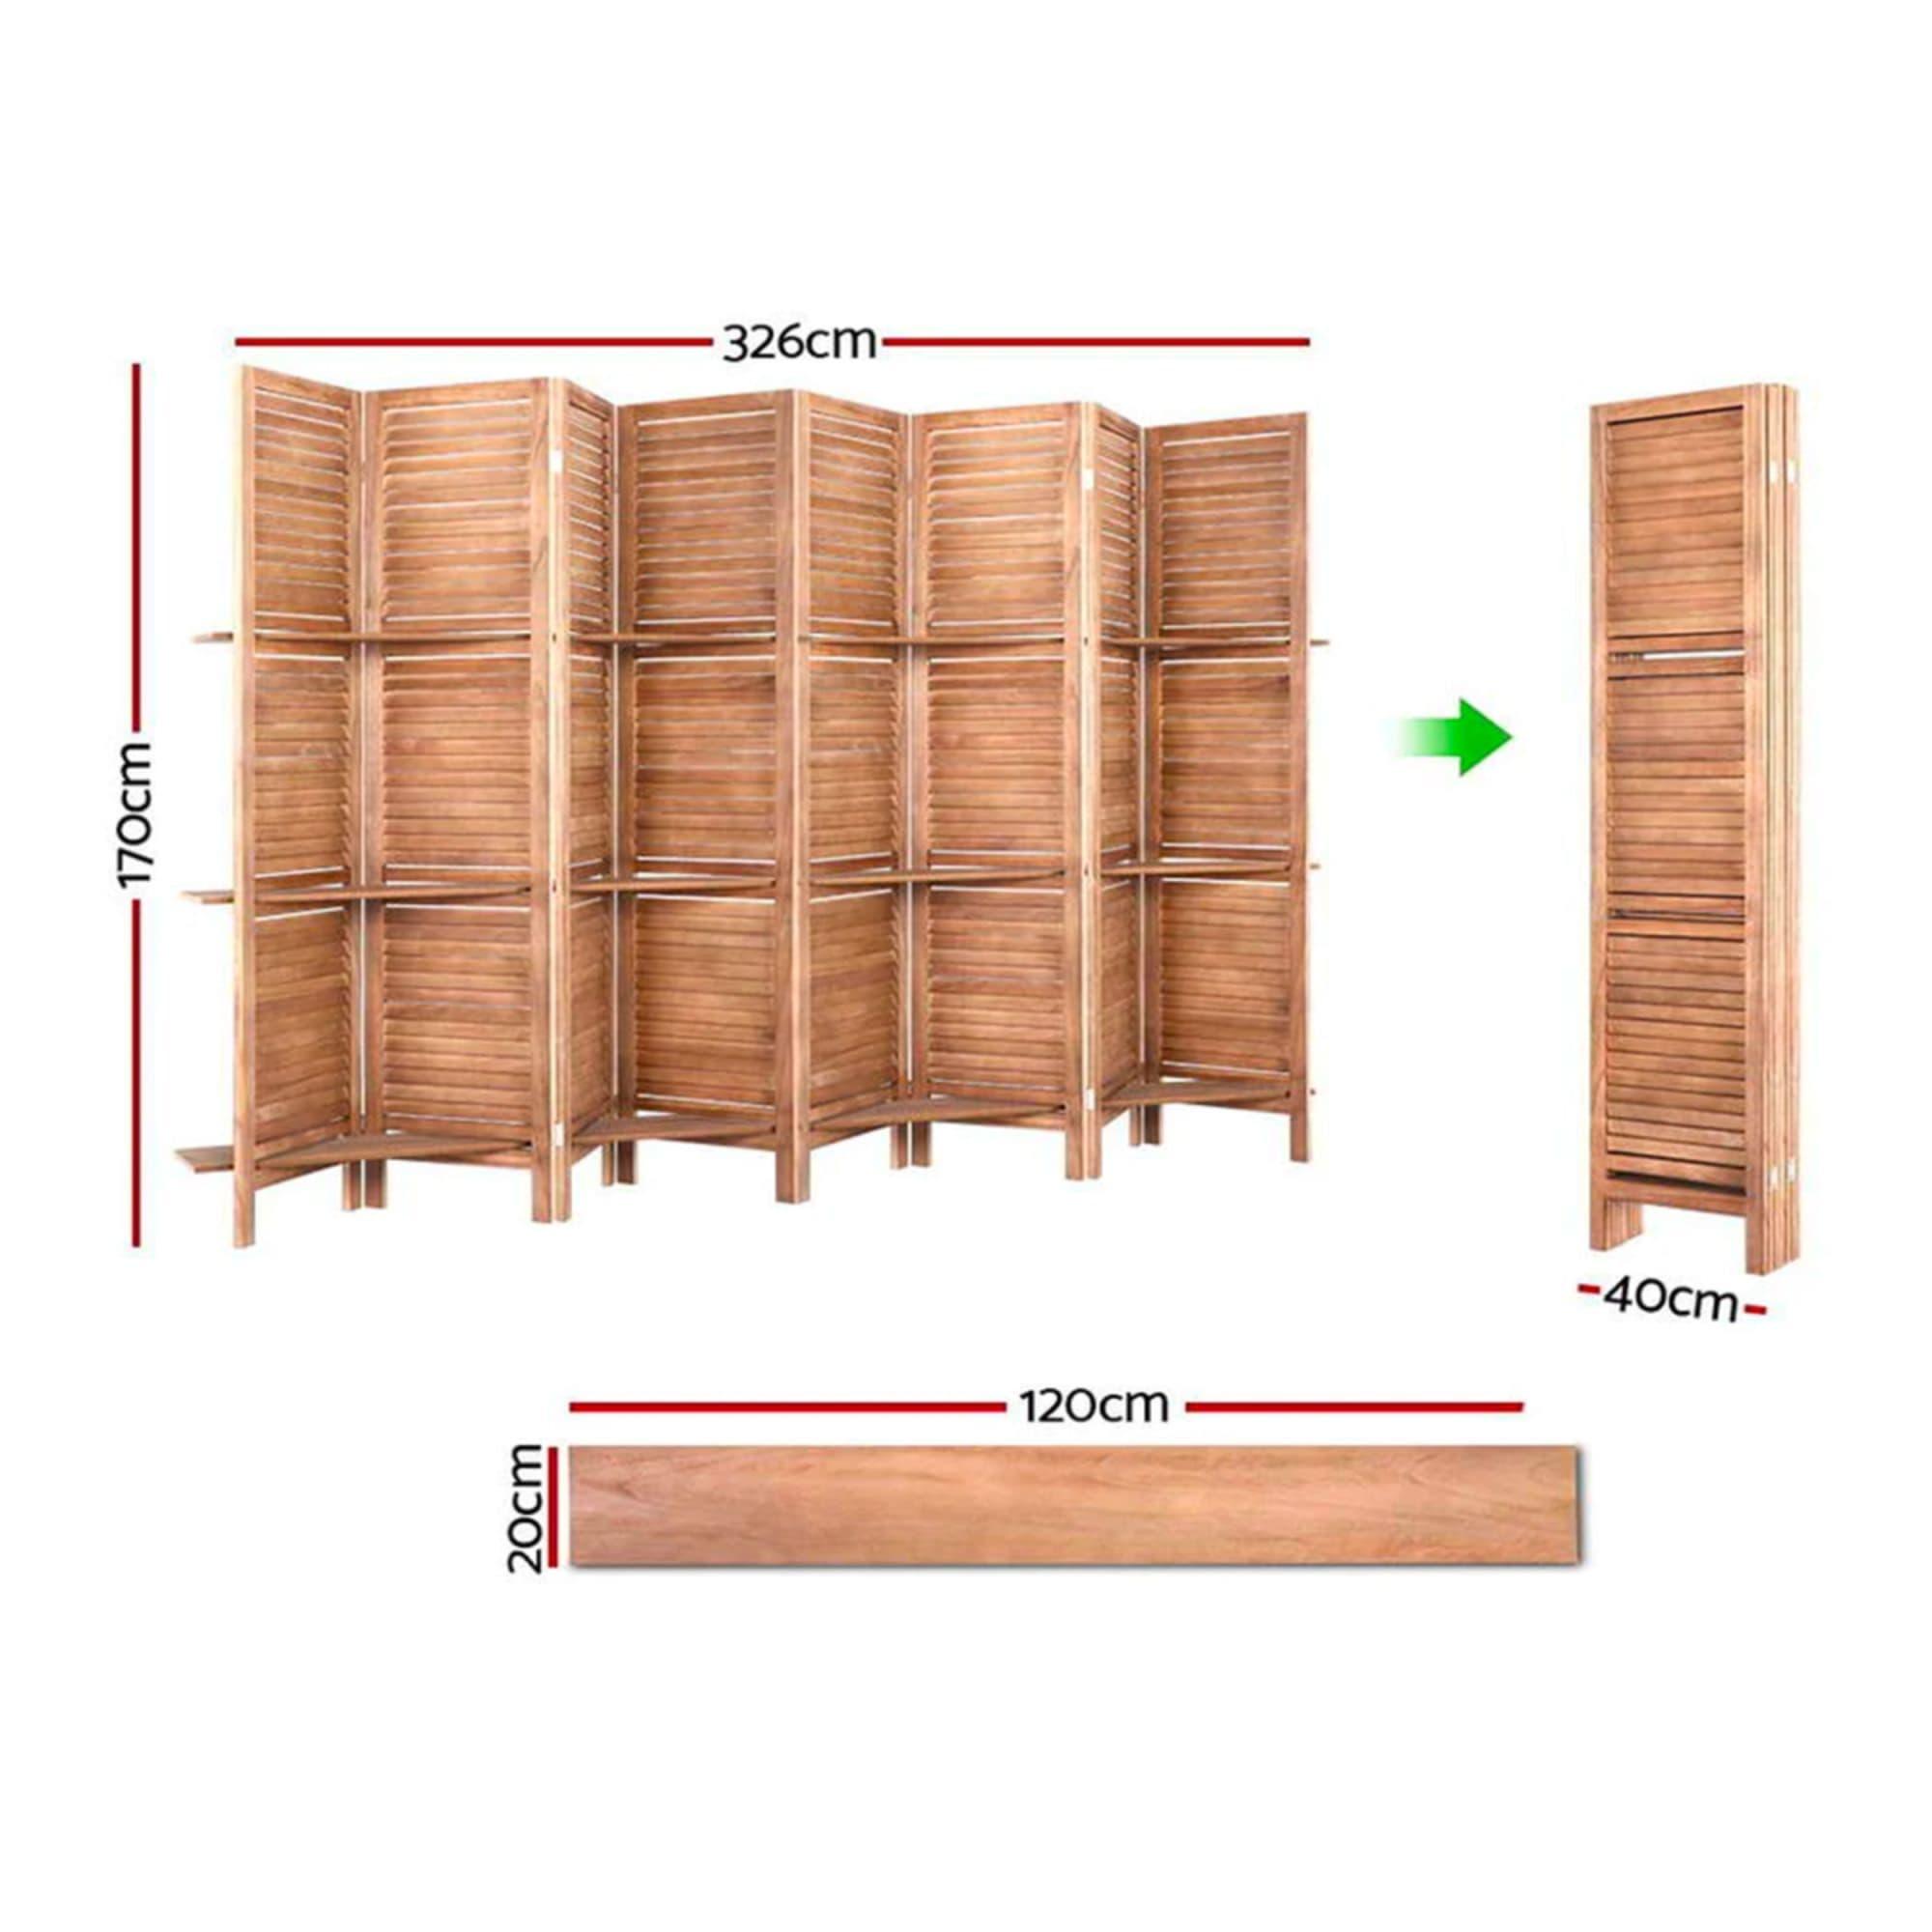 Artiss 8 Panel Wooden Room Divider with Shelf Brown Image 6